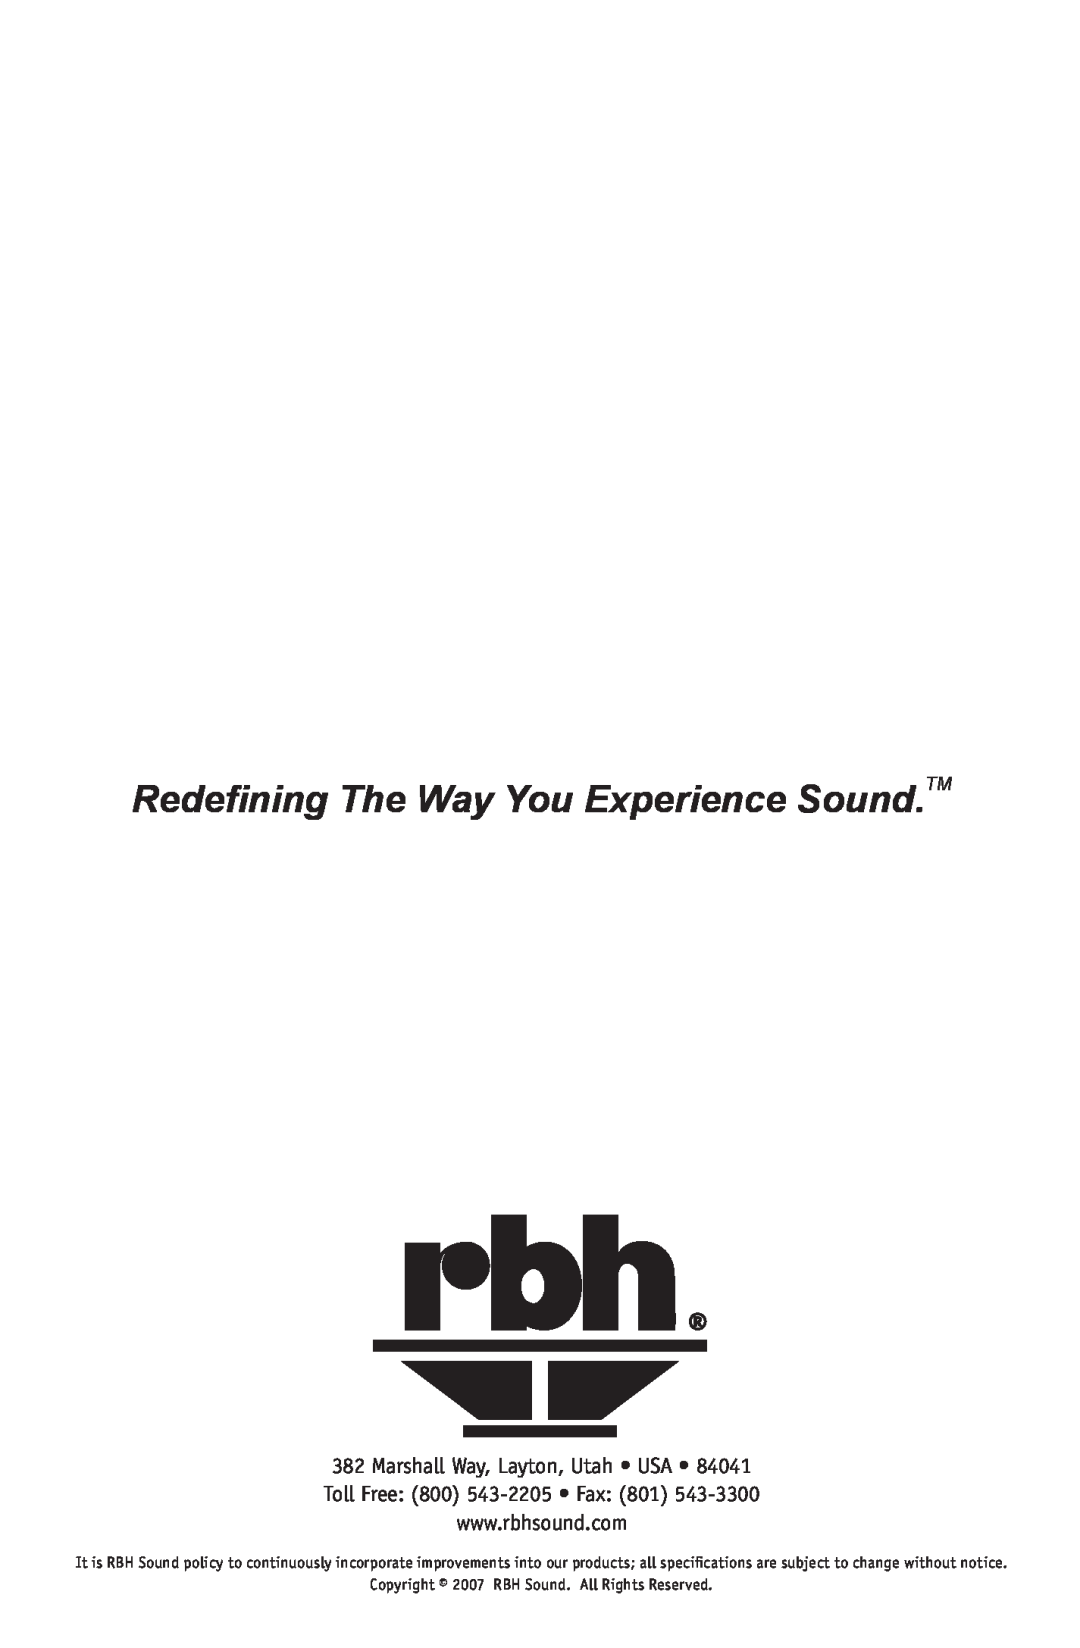 RBH Sound WM-24, WM-30 Redefining The Way You Experience Sound.TM, Copyright 2007 RBH Sound. All Rights Reserved 